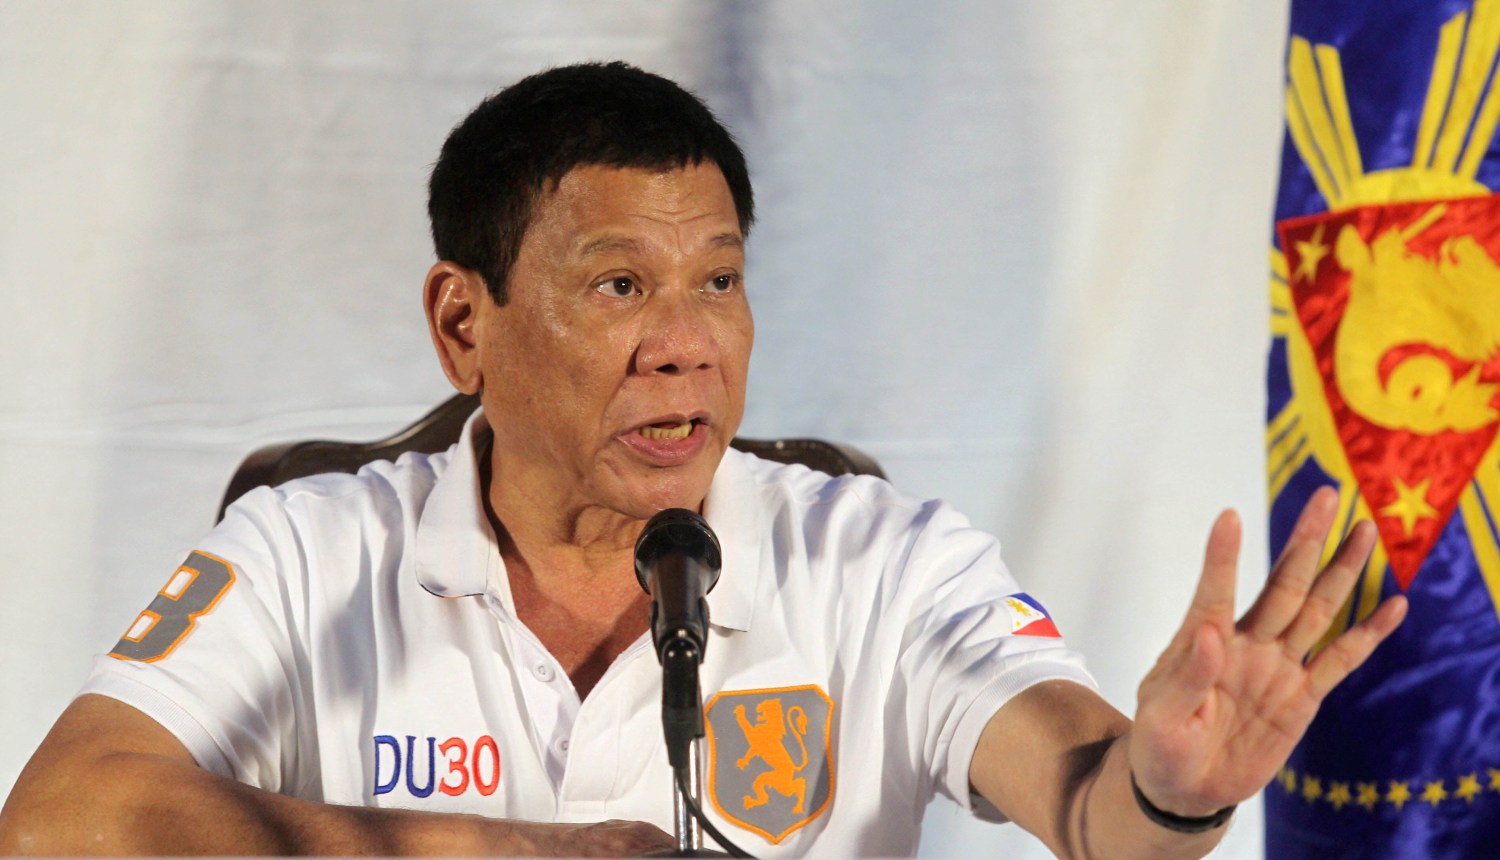 Philippine President Rodrigo Duterte speaks during a news conference in Davao city, southern Philippines August 21, 2016. REUTERS/Lean Daval Jr/File Photo - RTX2O489